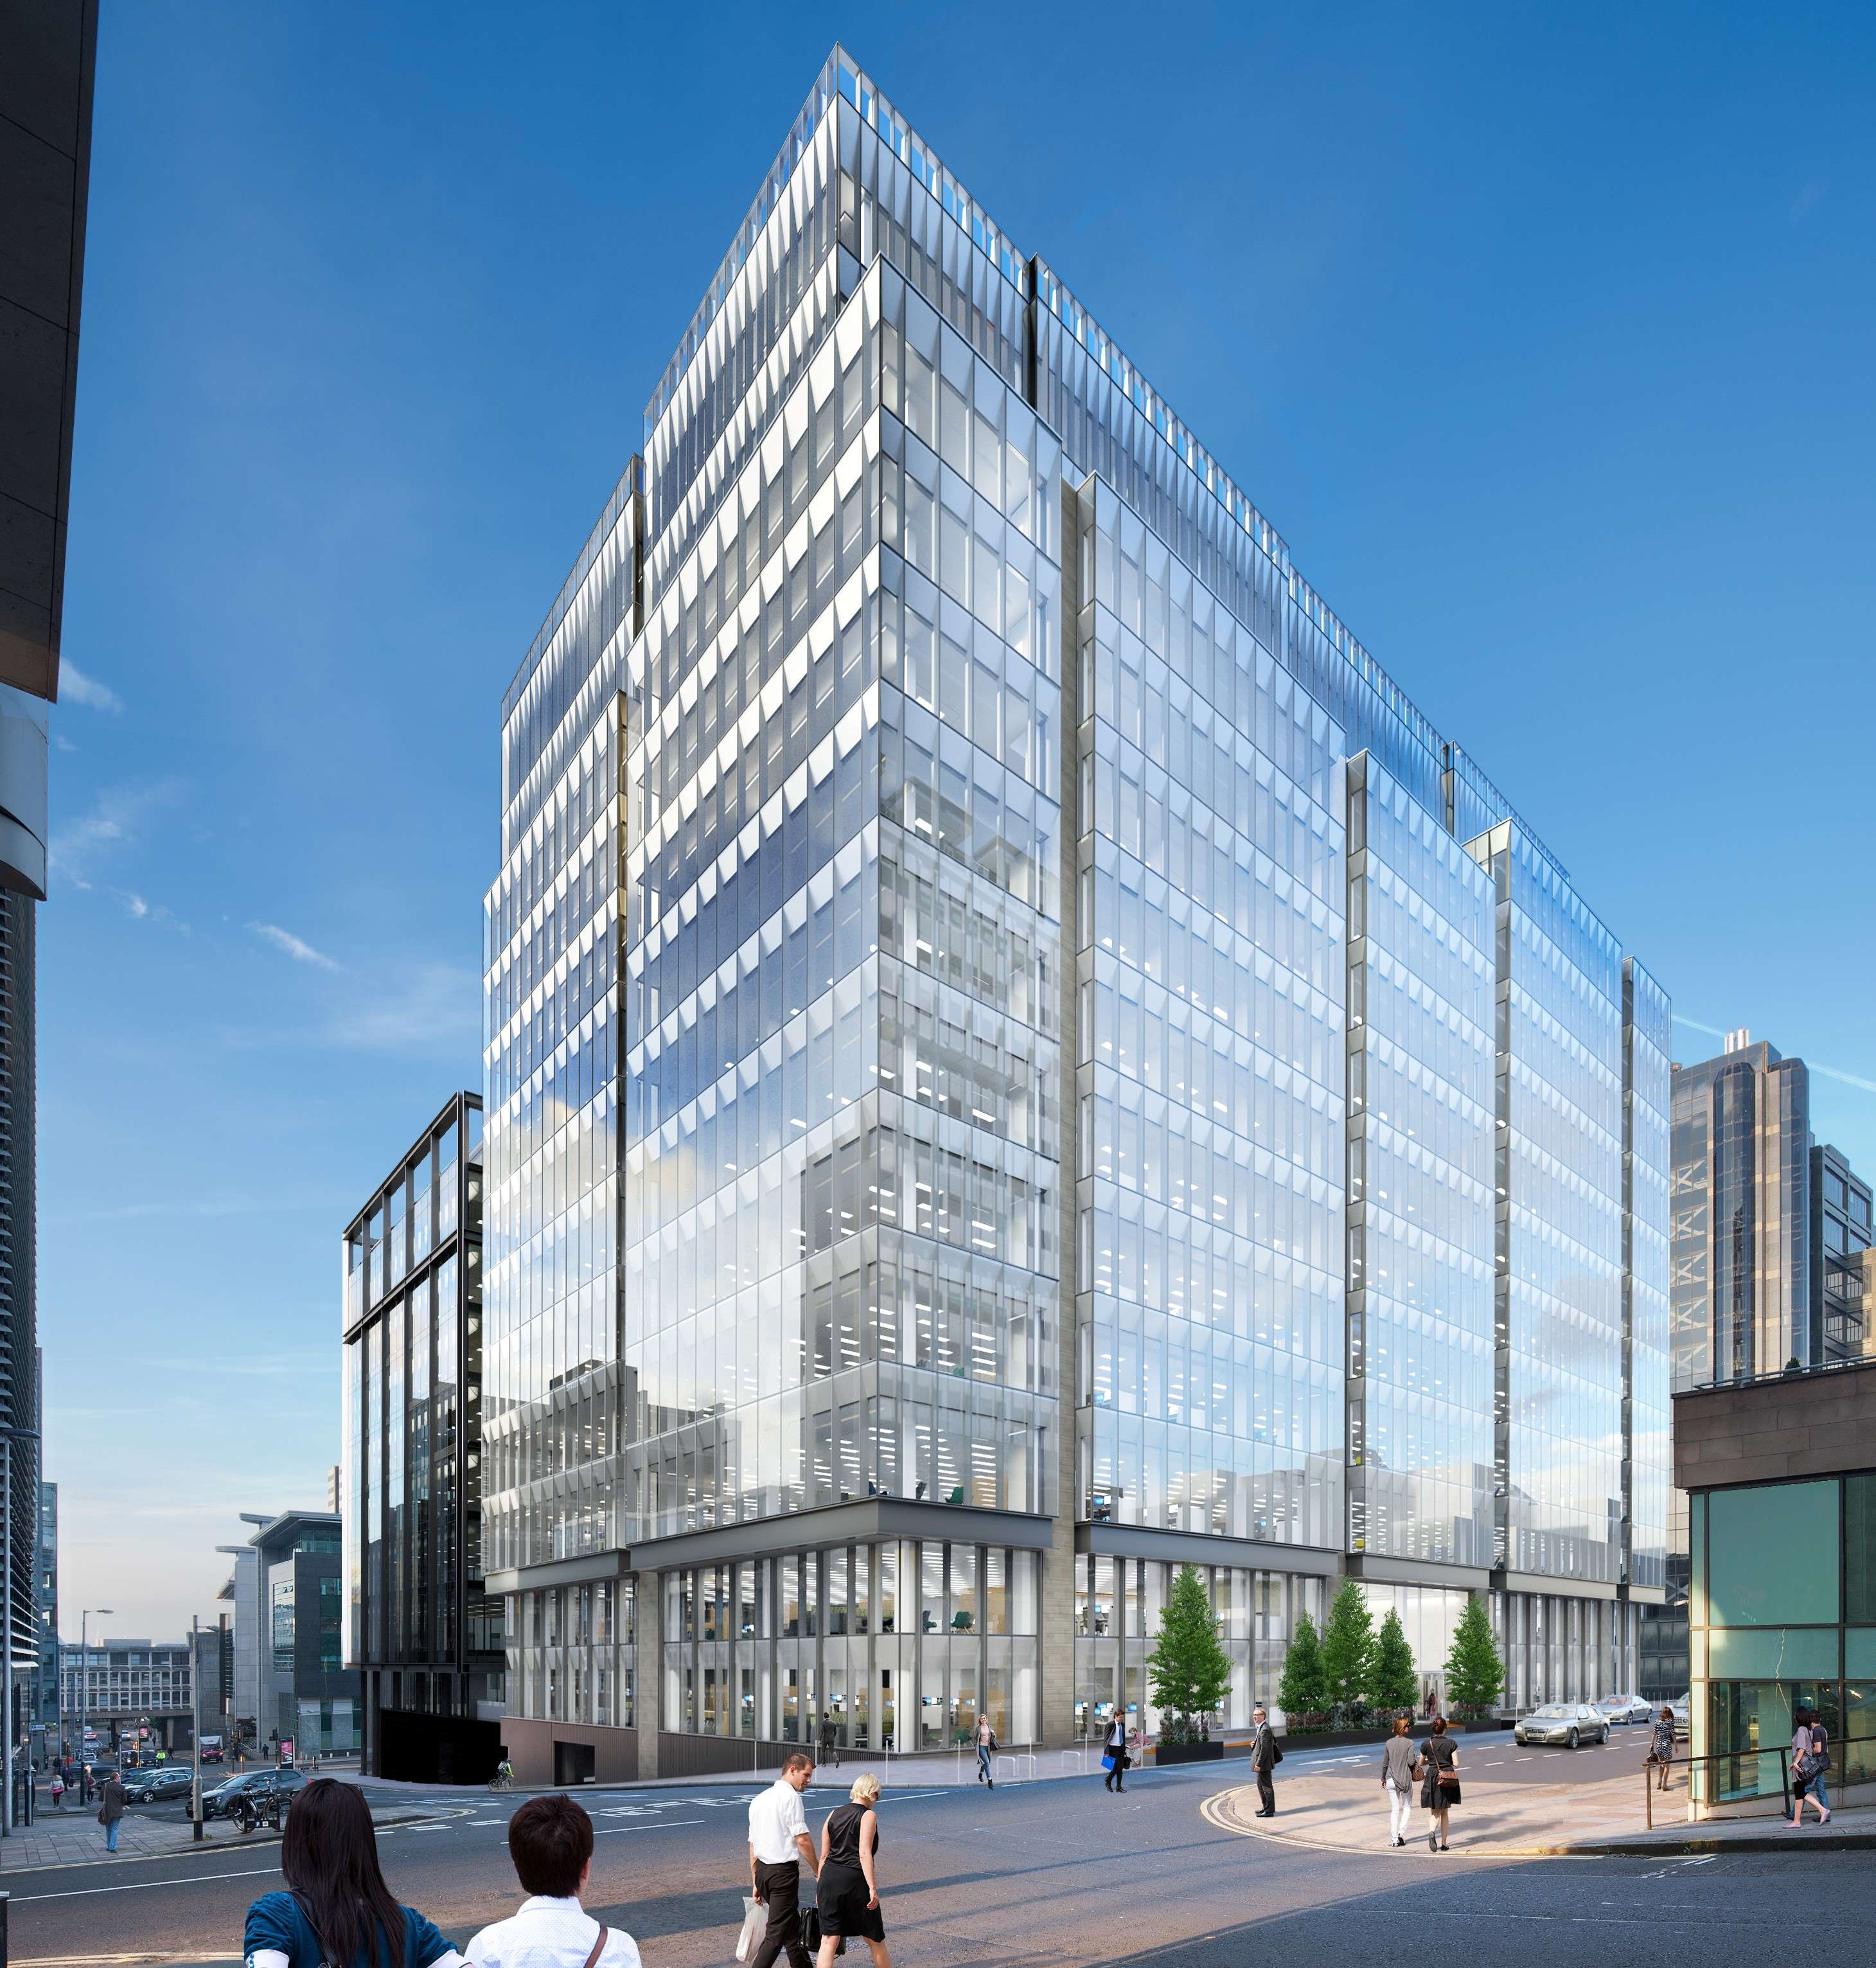 177 Bothwell Street earns smart building accreditation first for Scotland